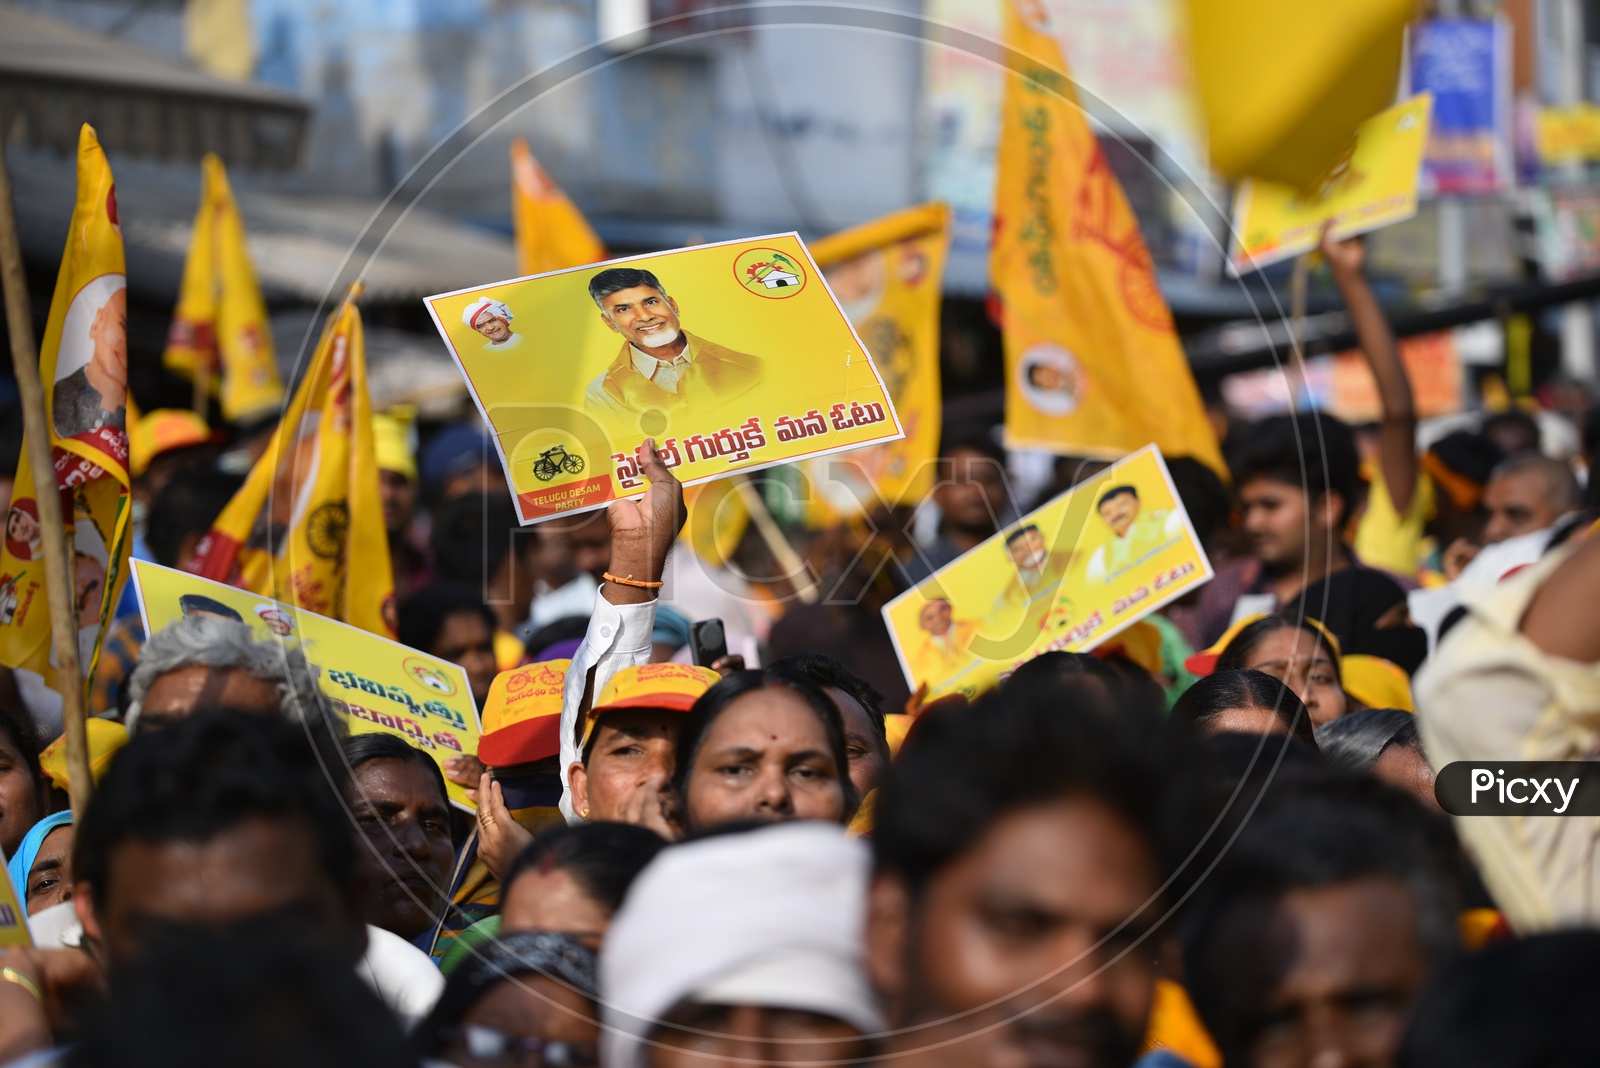 TDP party workers holding Placards of Chandra Babu Naidu and TDP party Flags